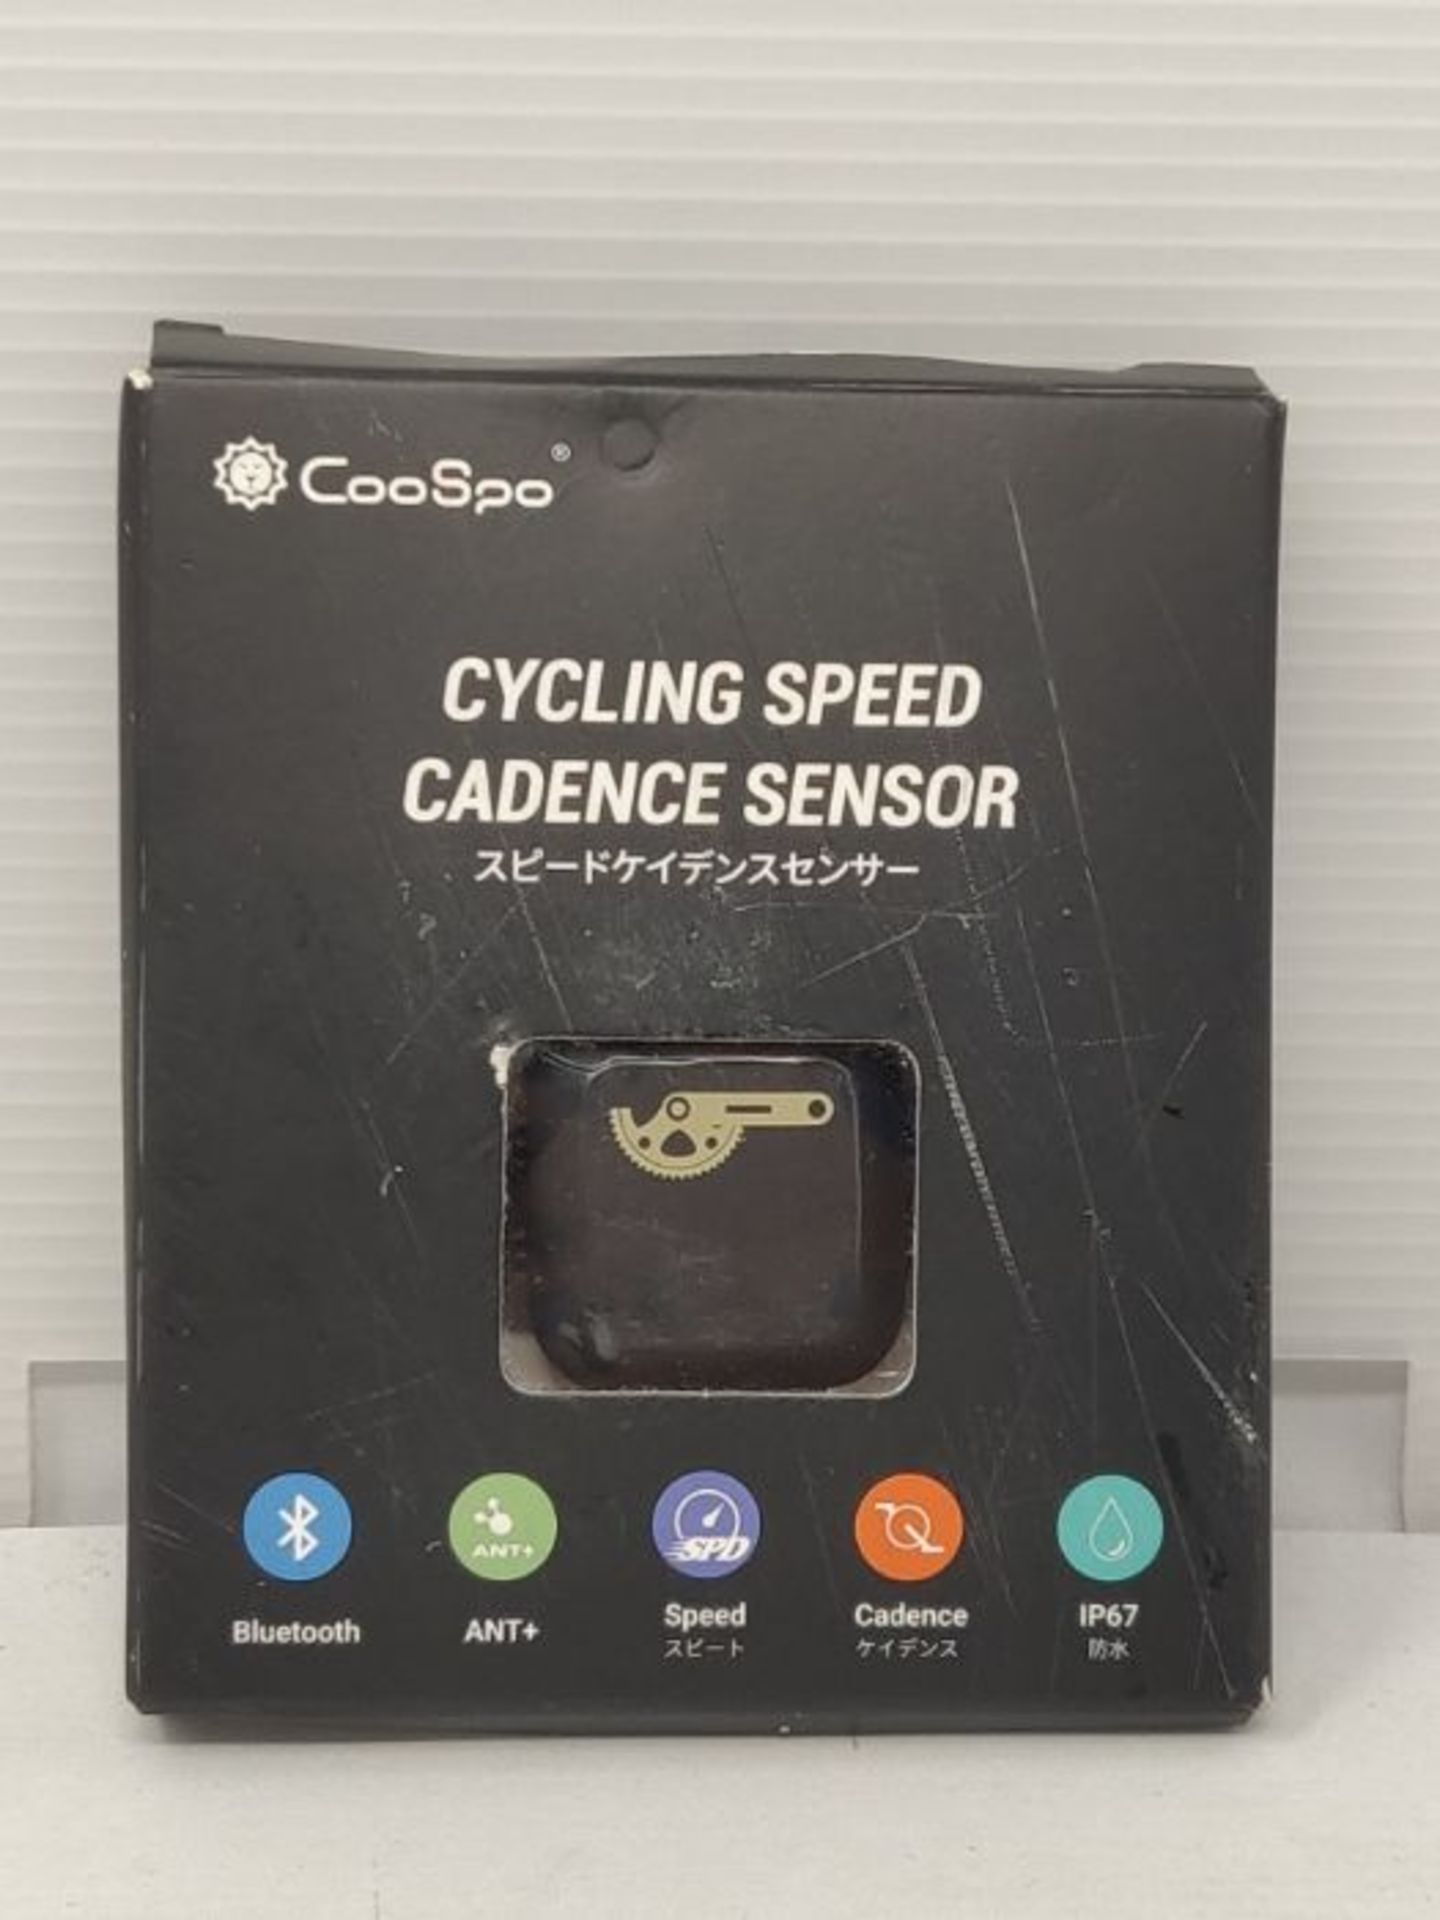 CooSpo Cadence and Speed Sensor Bluetooth ANT+ Cycling RPM Sensor for Bike Compatible - Image 2 of 3